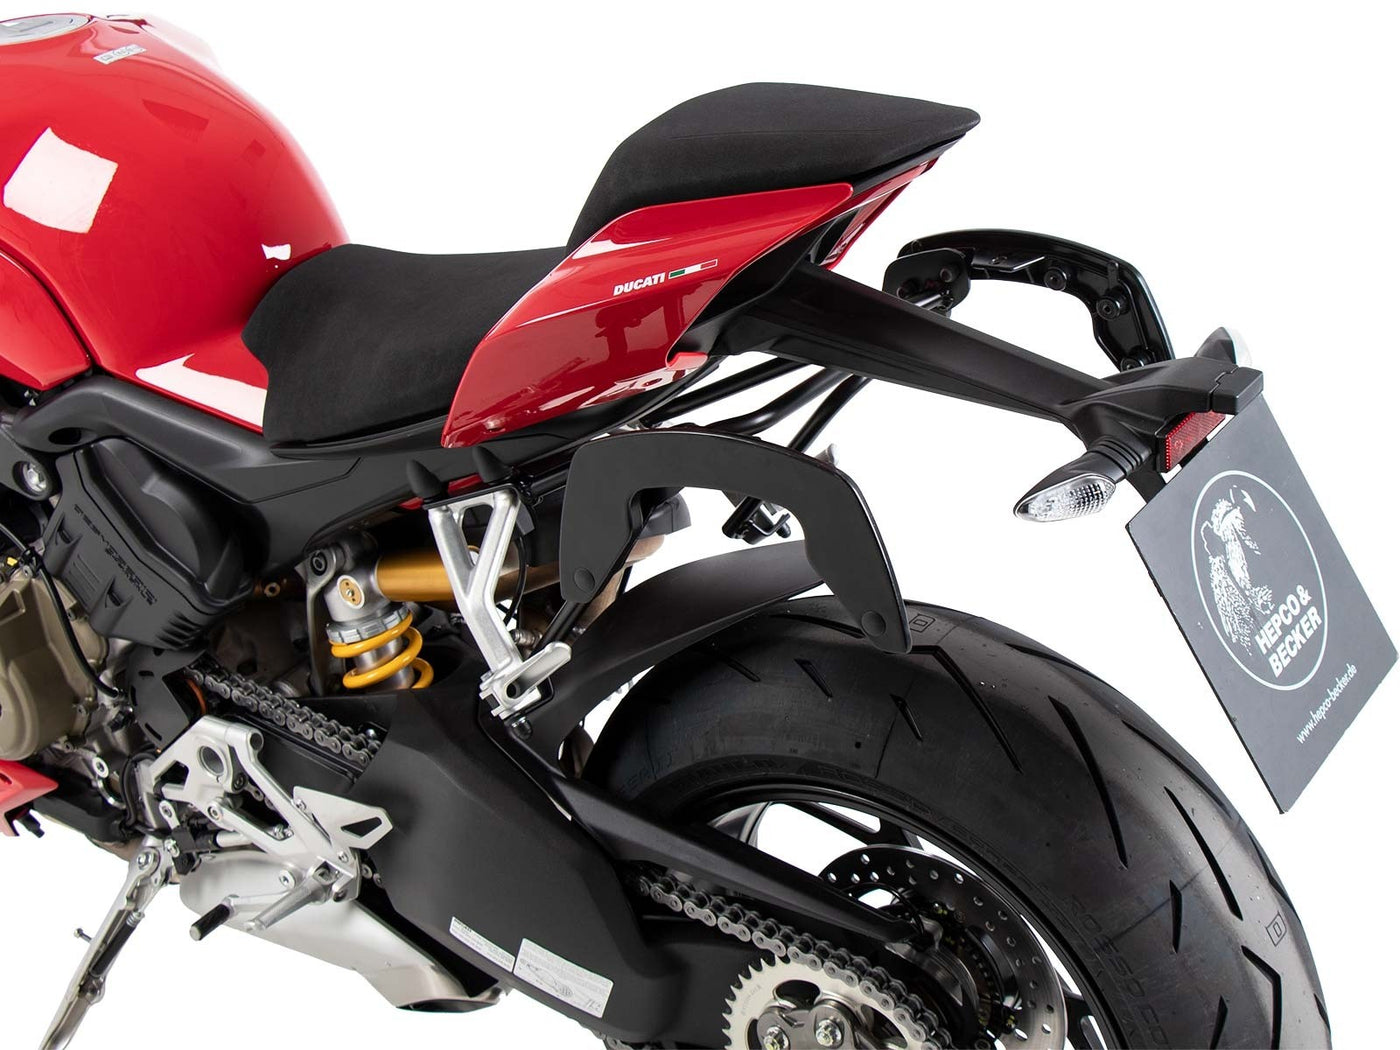 C-Bow SideCarrier for DUCATI Streetfighter V4 / S & Panigale V4 / S / R